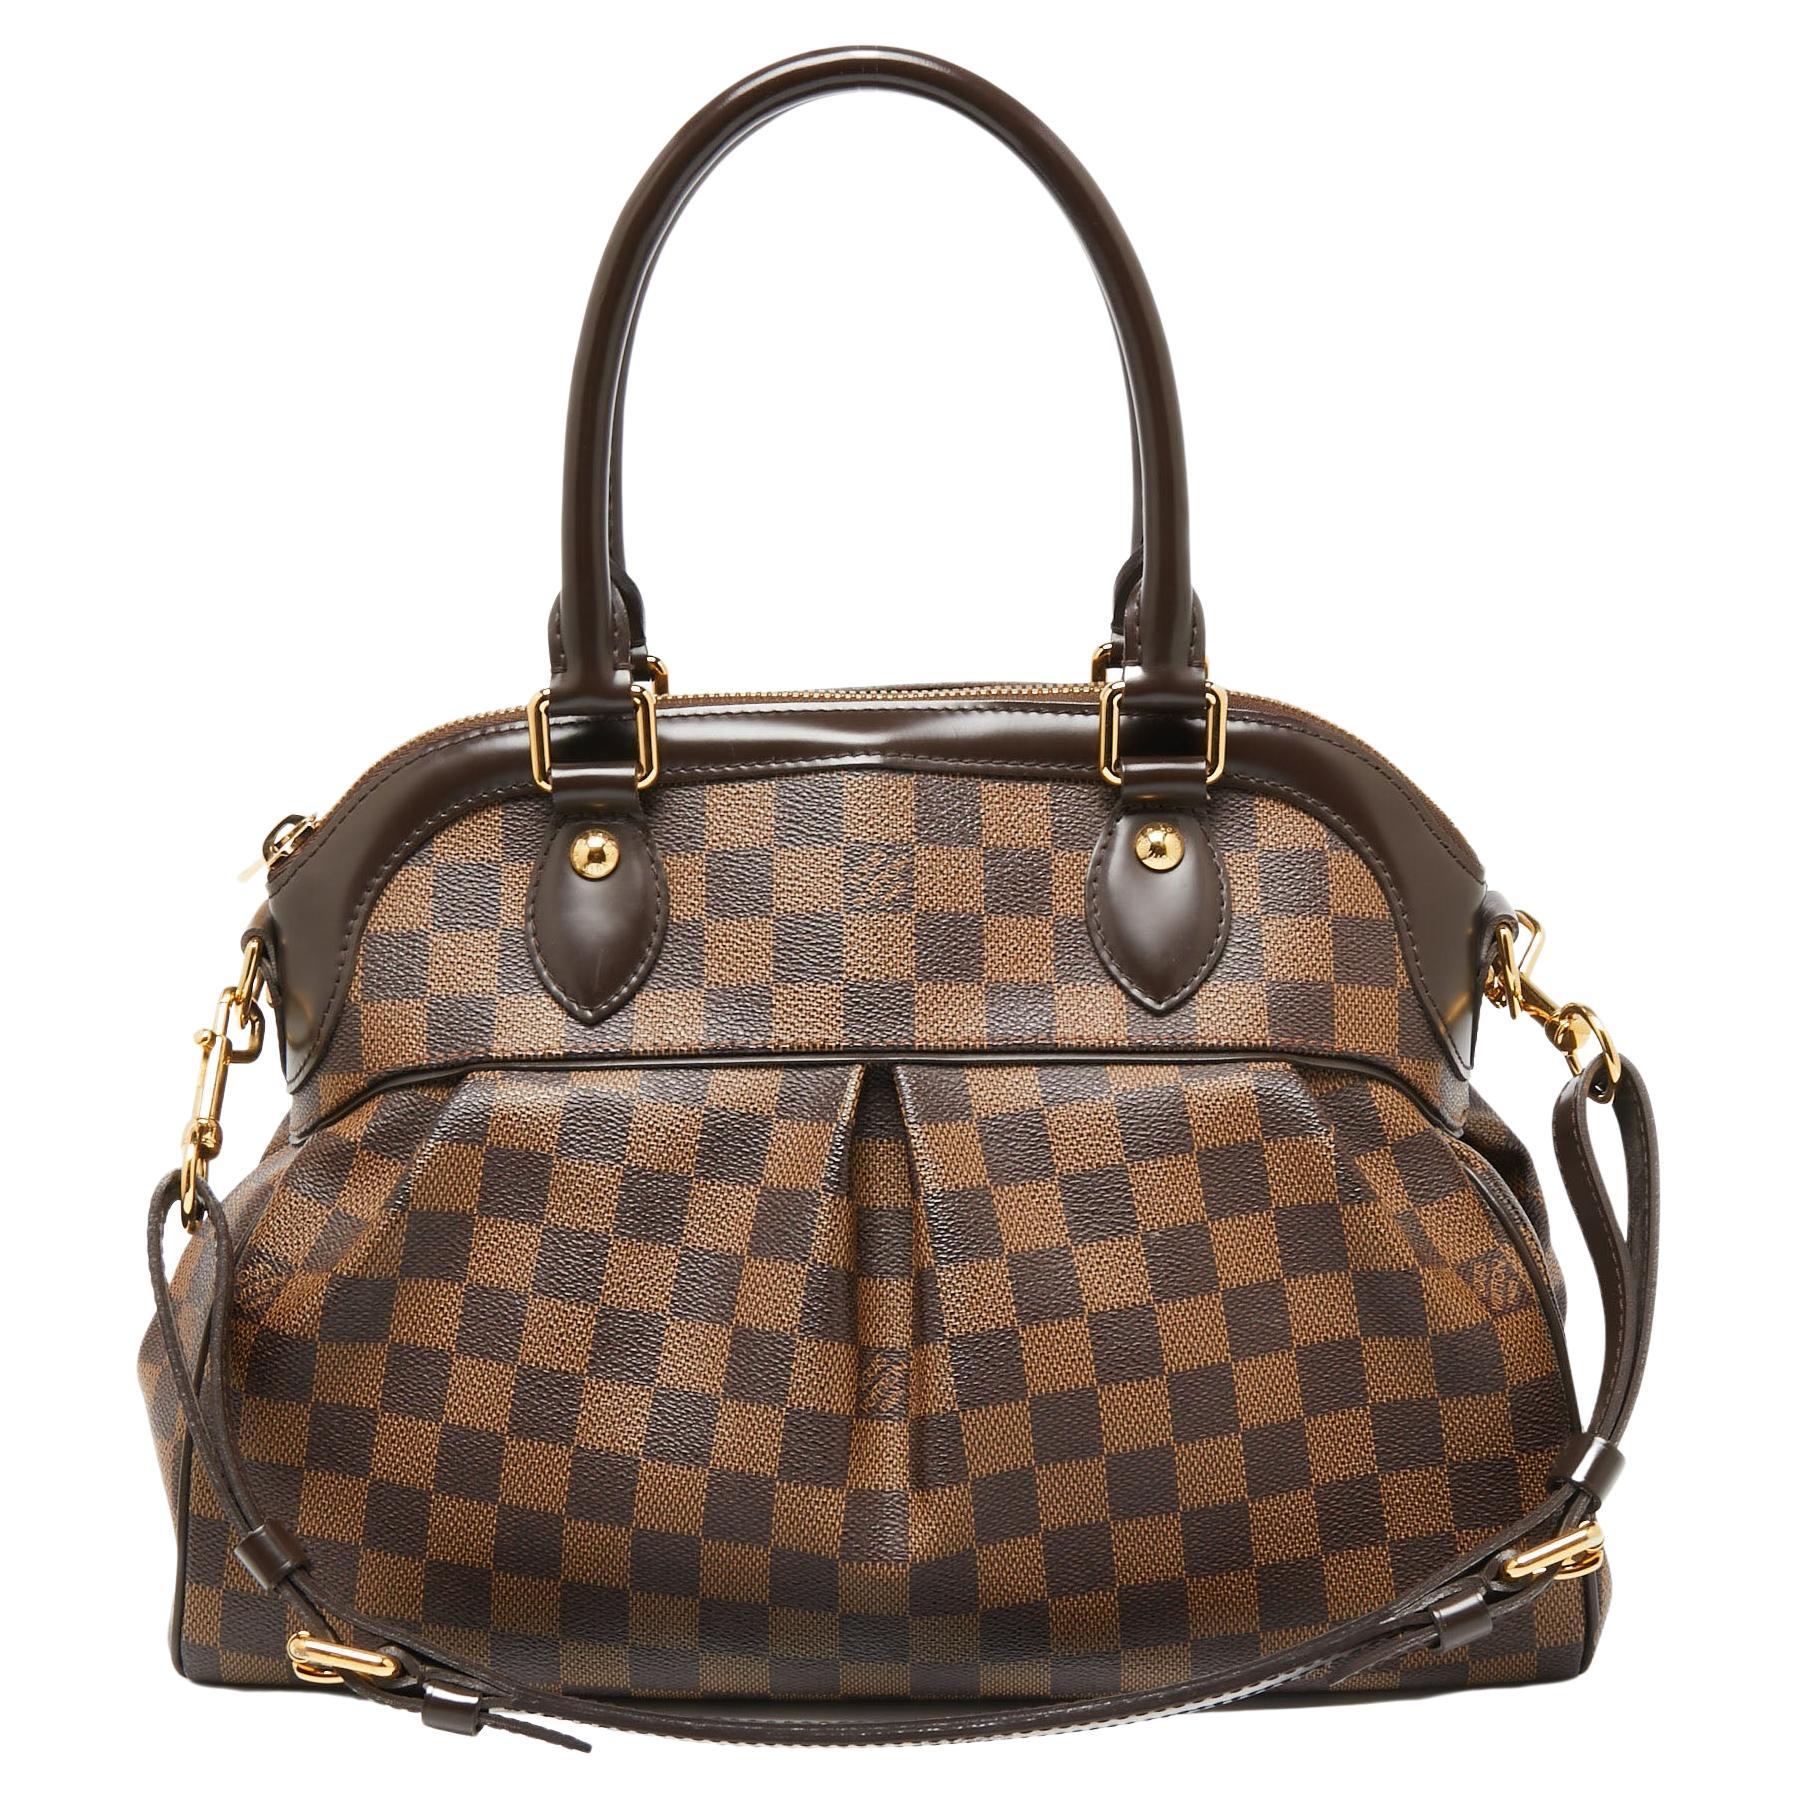 Louis Vuitton Pm - 1,363 For Sale on 1stDibs